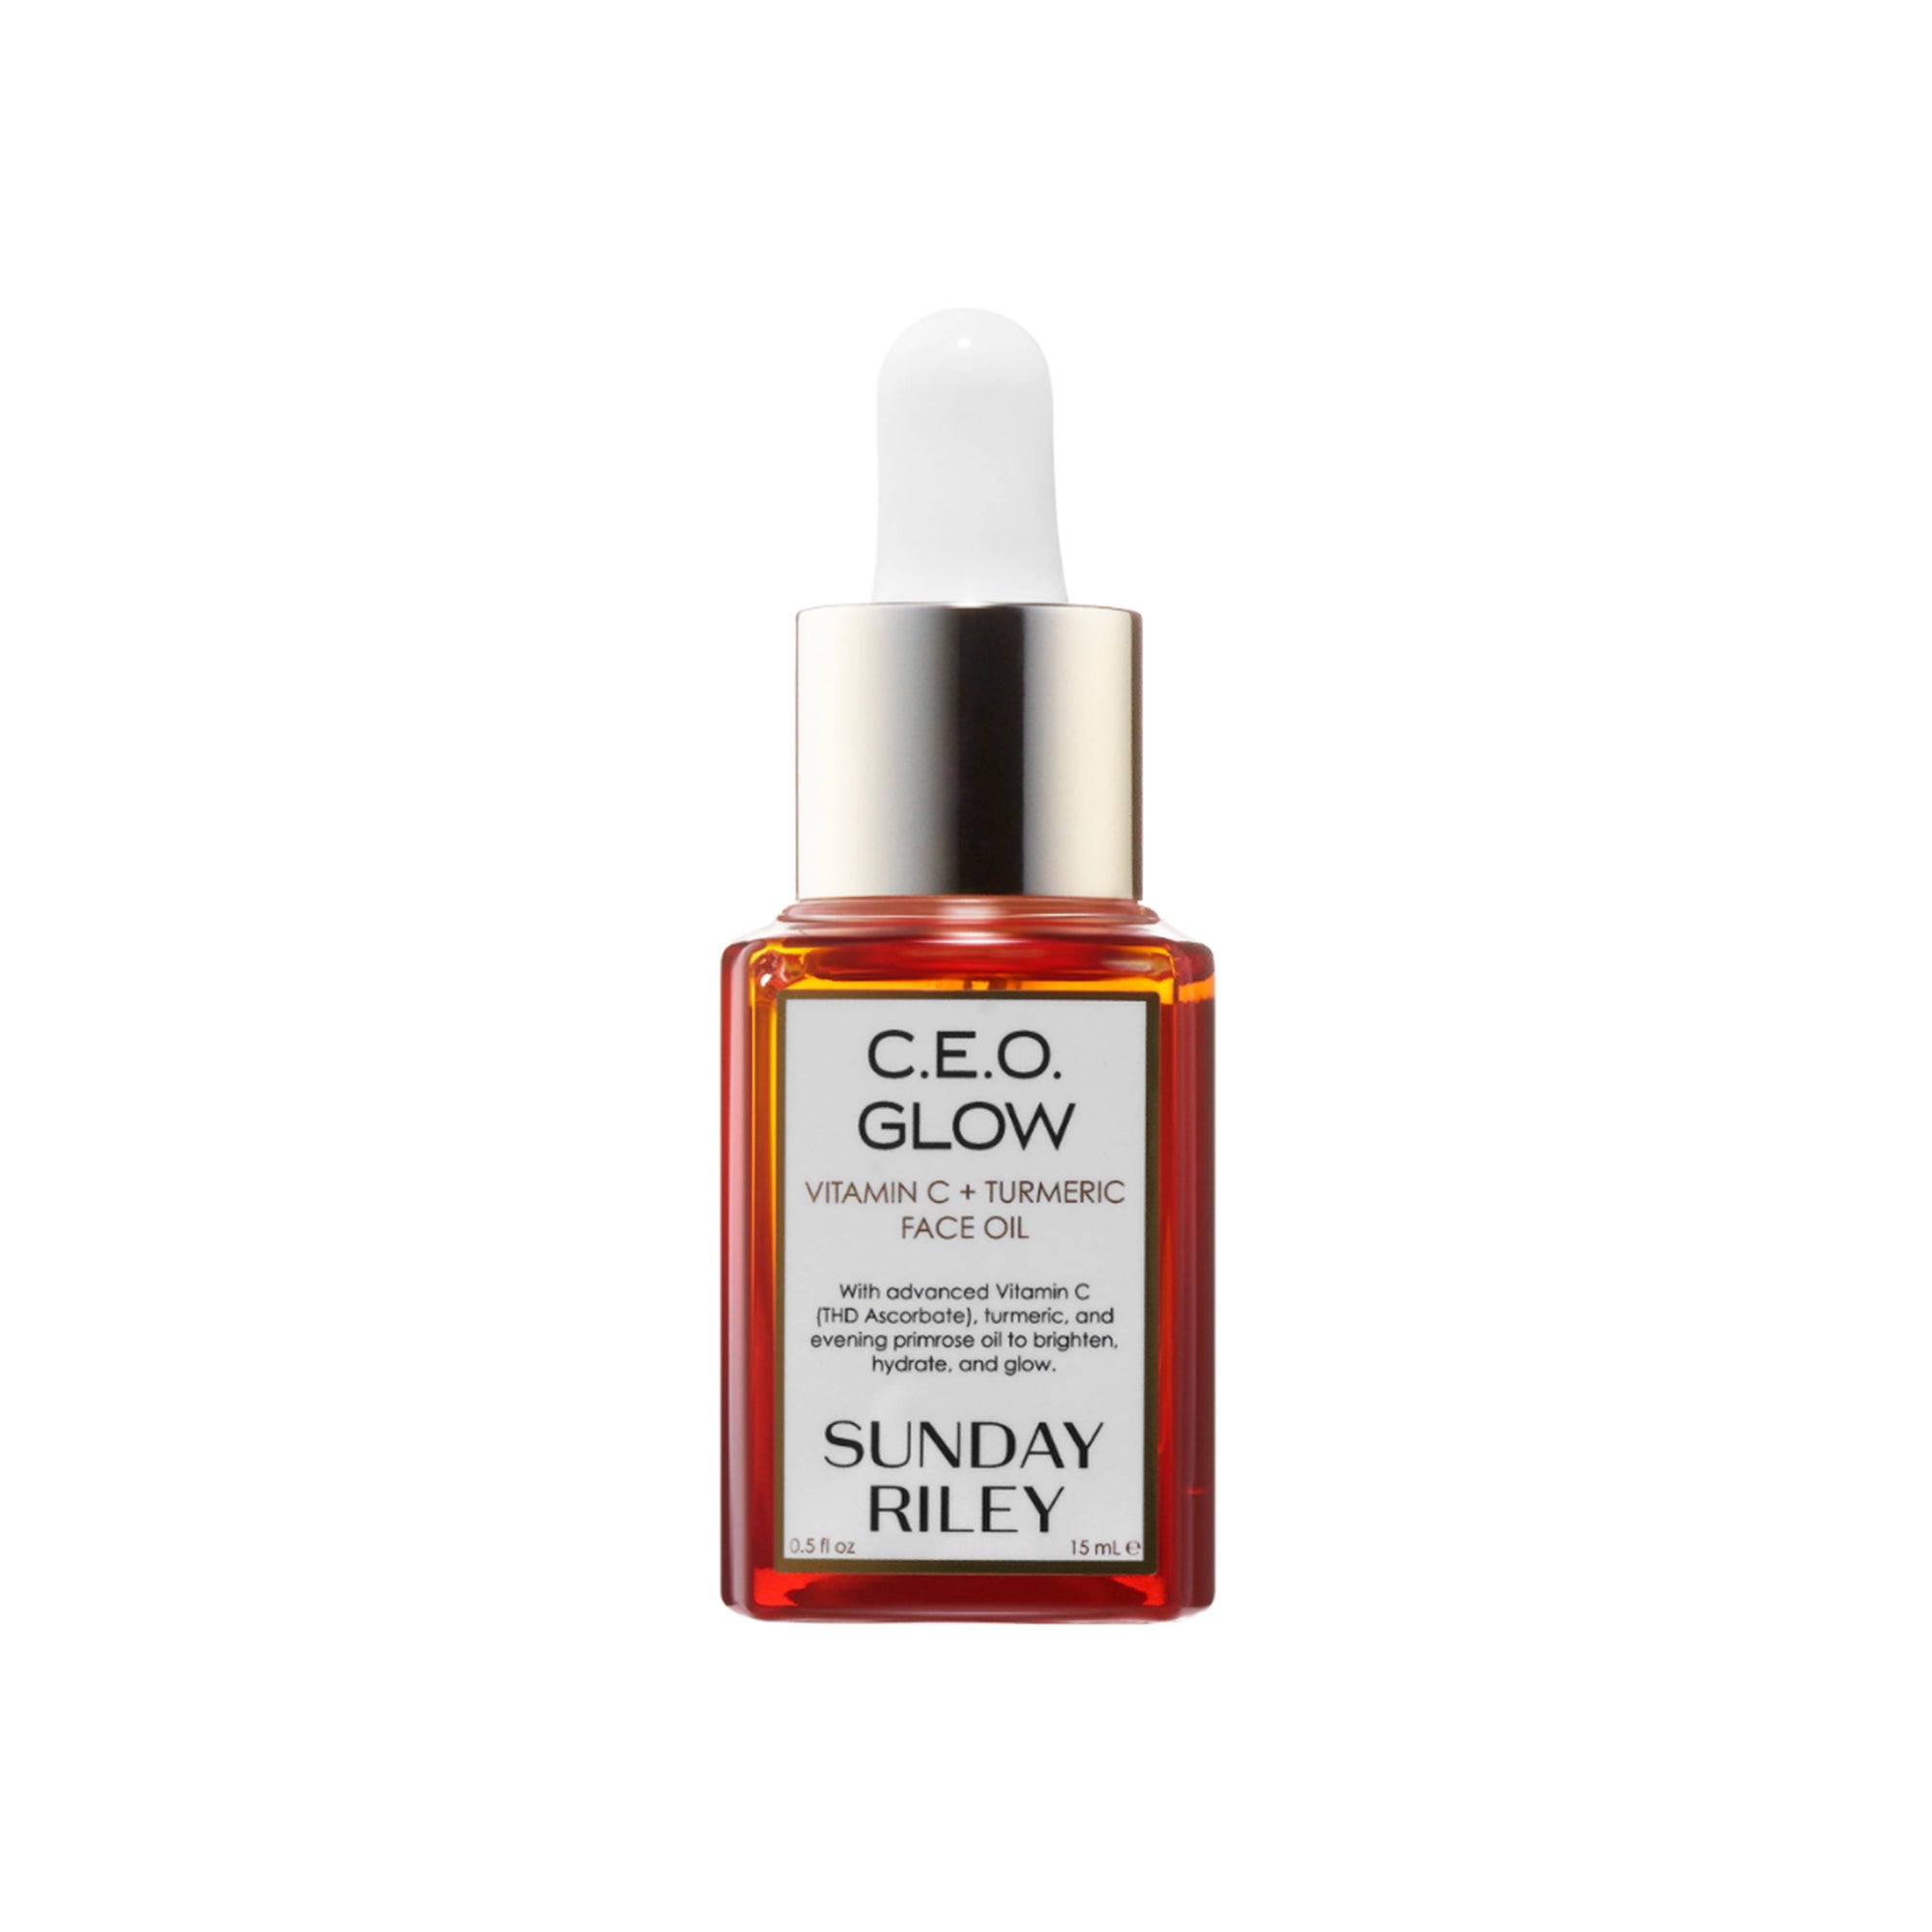 Sunday Riley CEO Glow face oil